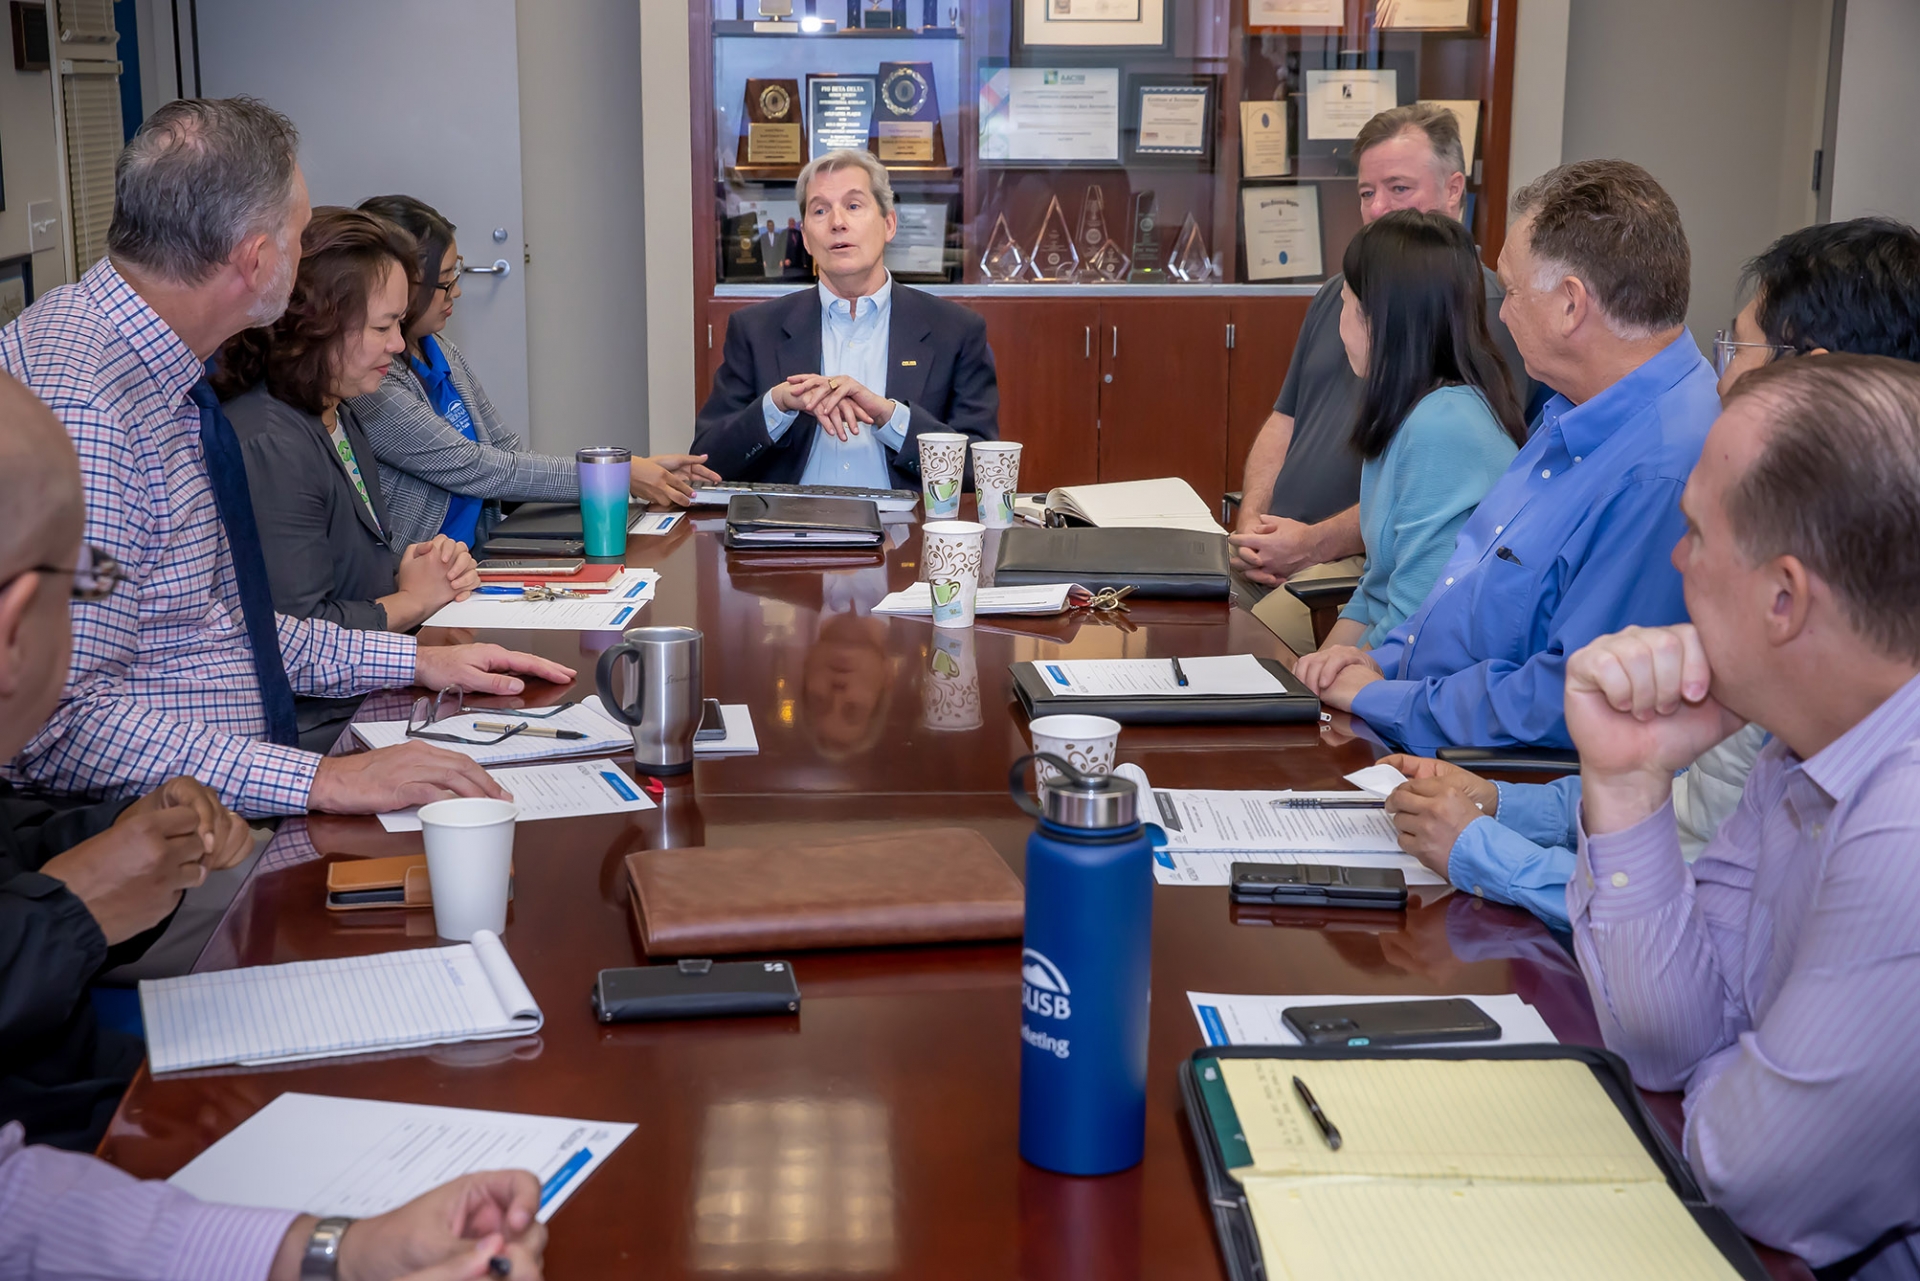 Montgomery Van Wart, the 2022-23 Outstanding Professor Award recipient, leads a meeting in the Jack H. Brown College of Business and Public Administration.>>